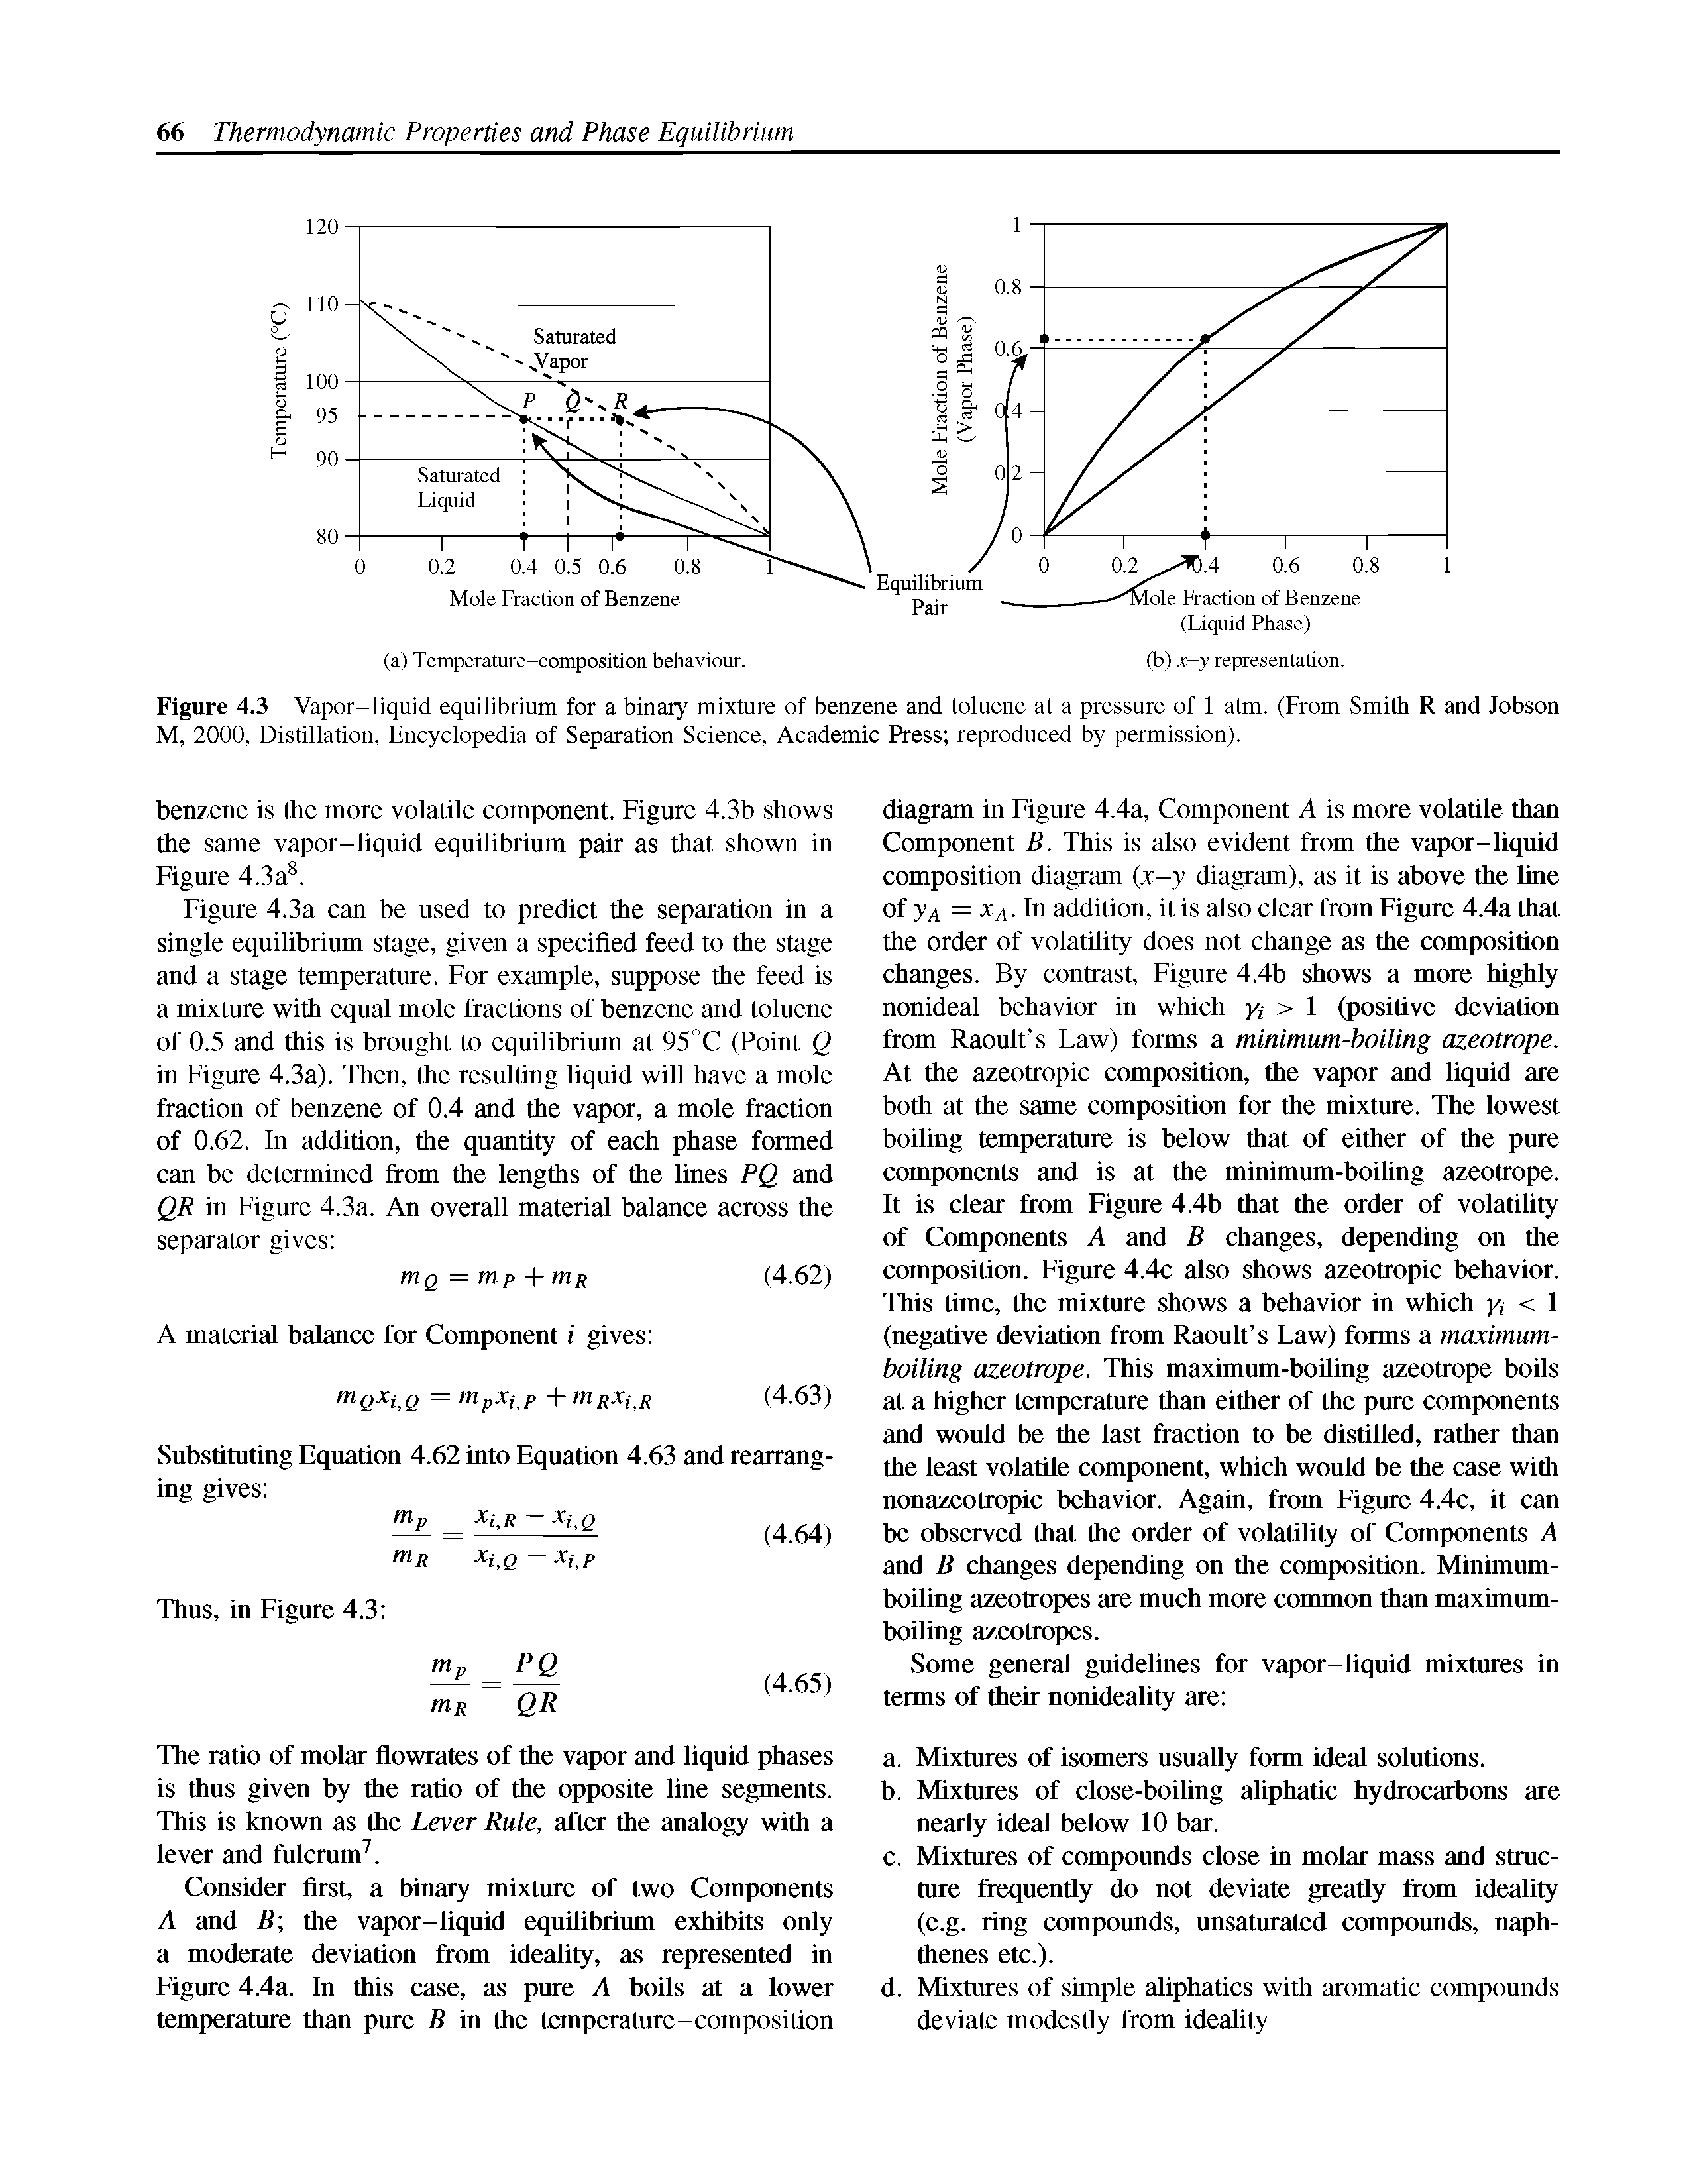 Figure 4.3 Vapor-liquid equilibrium for a binary mixture of benzene and toluene at a pressure of 1 atm. (From Smith R and Jobson M, 2000, Distillation, Encyclopedia of Separation Science, Academic Press reproduced by permission).